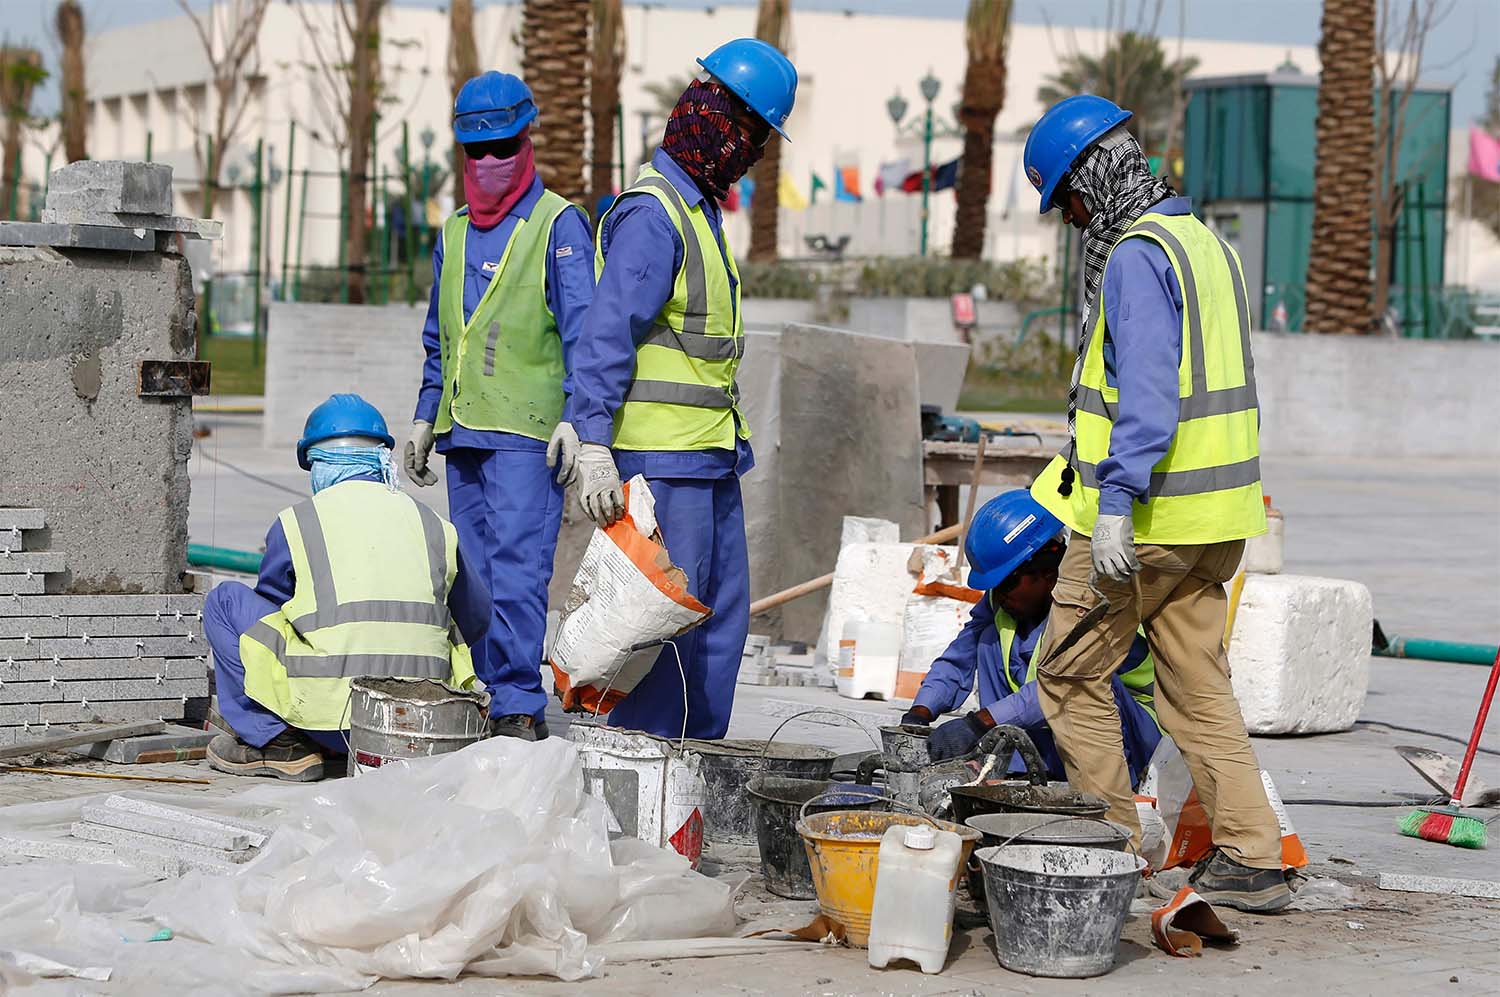 Migrant workers are treated in Qatar according to their racial identity